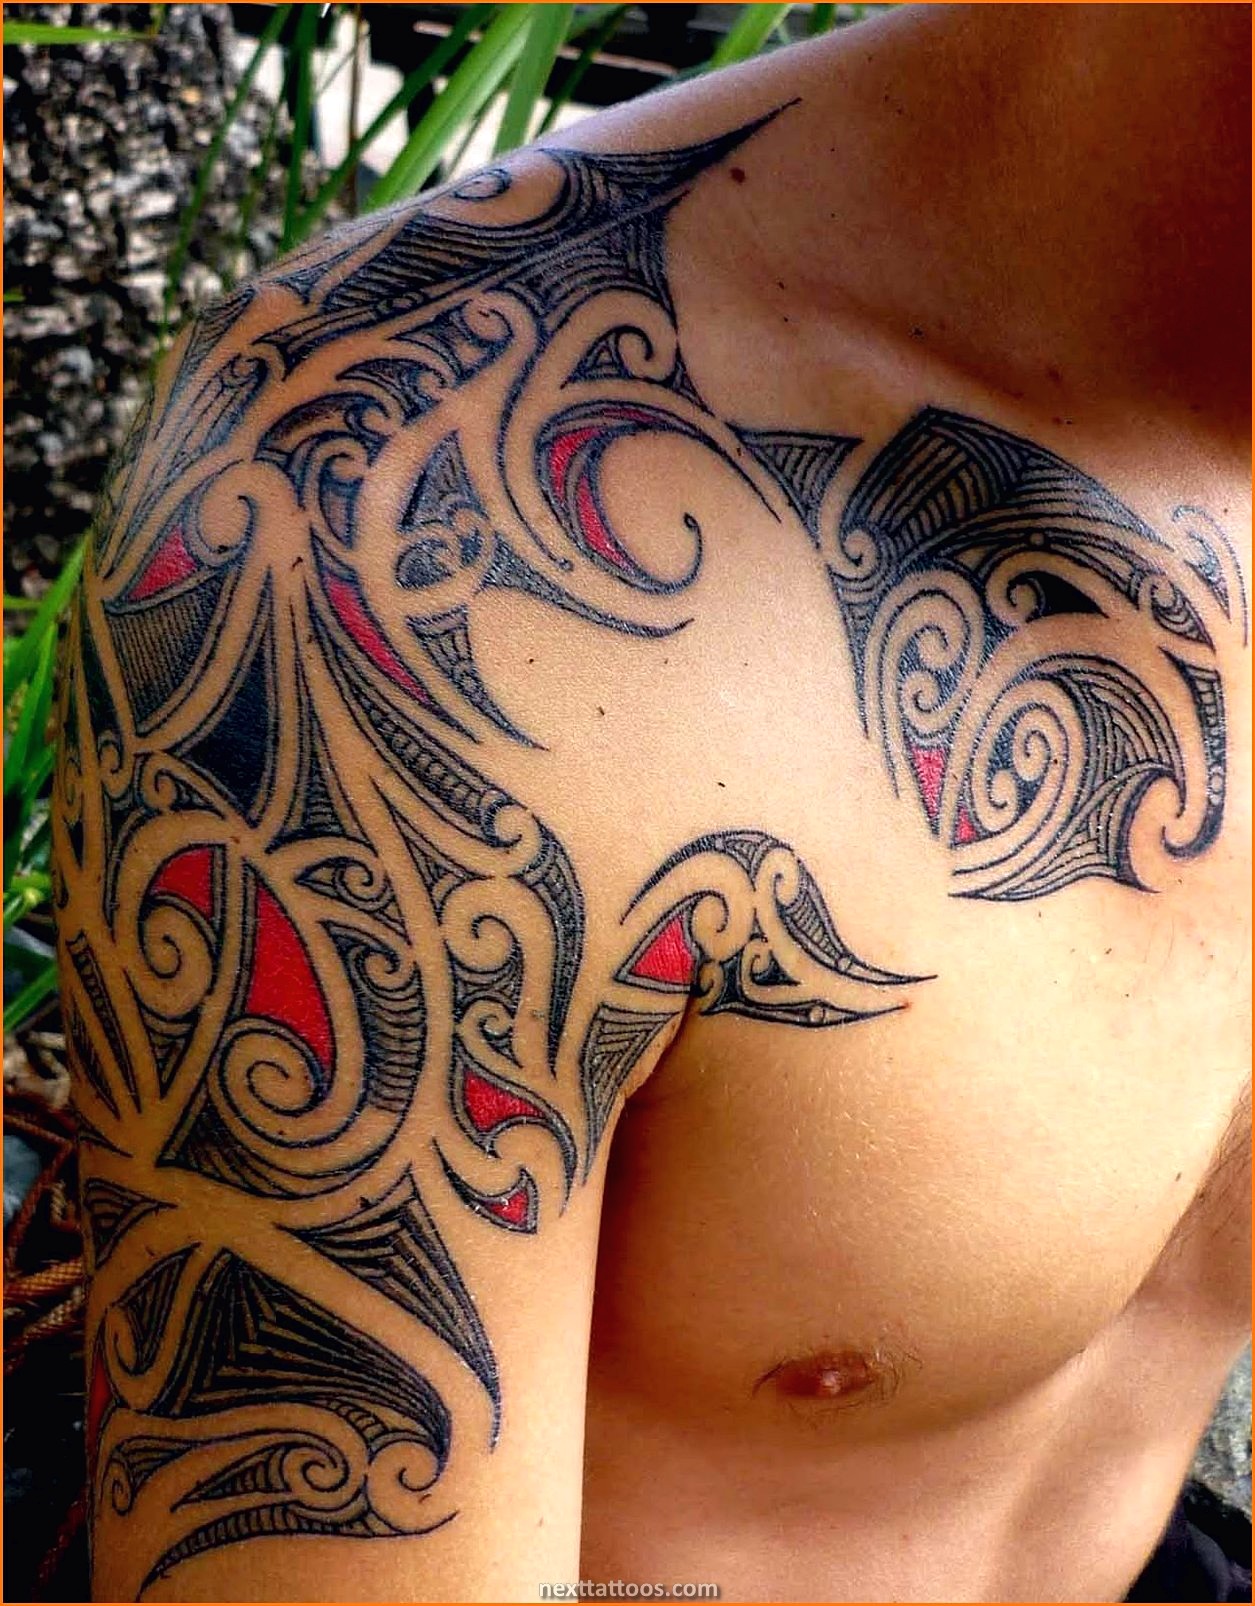 Best Male Tattoos With Meaning